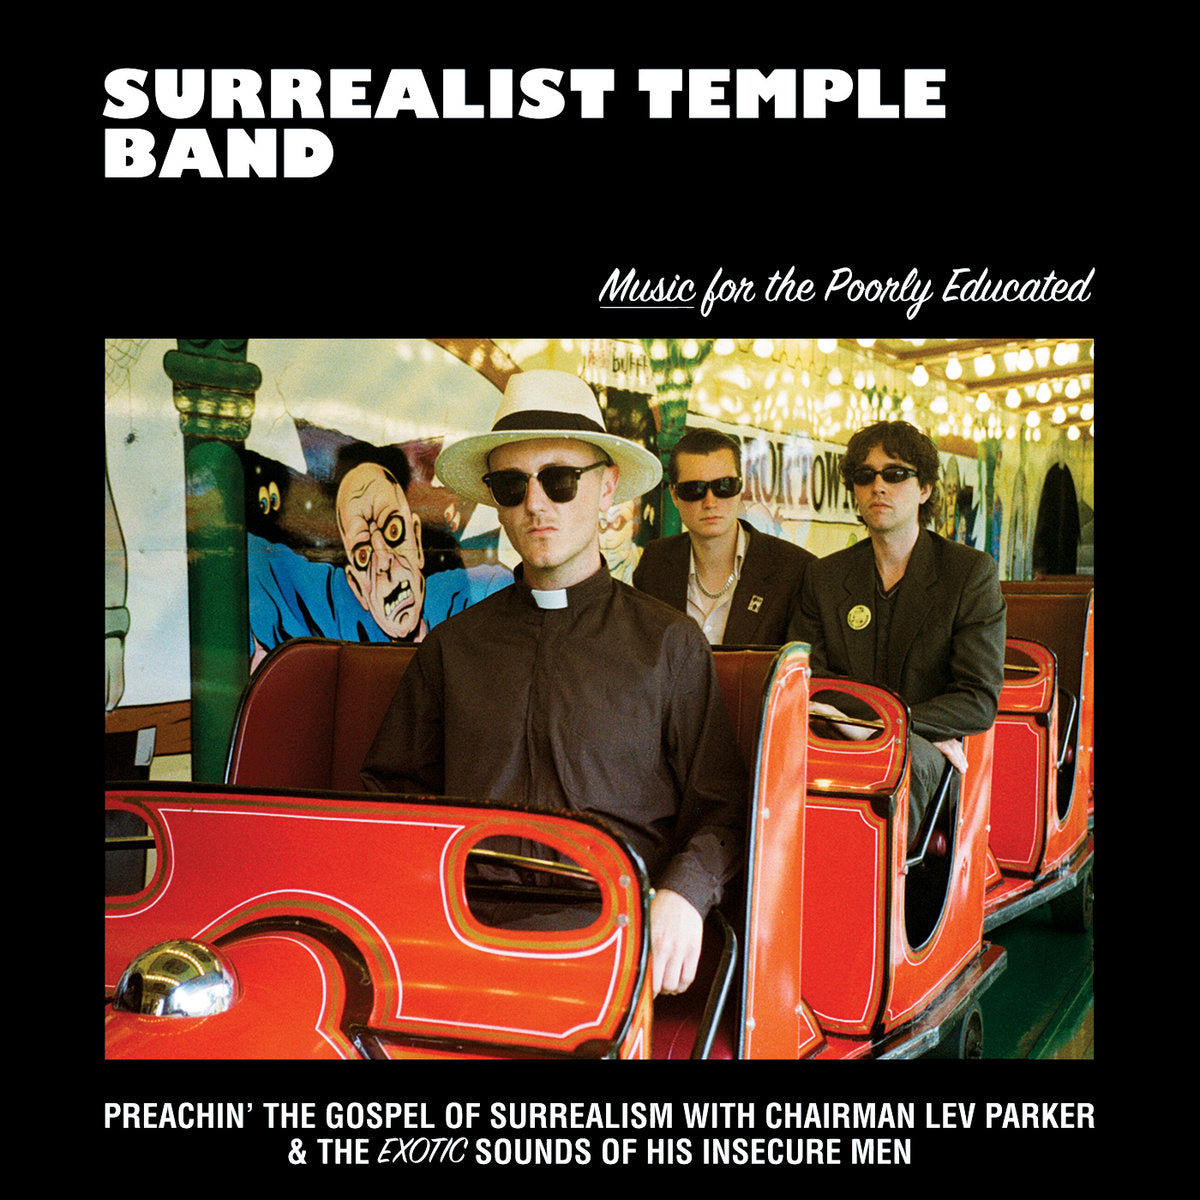 SURREALIST TEMPLE BAND - Music for the Poorly Educated